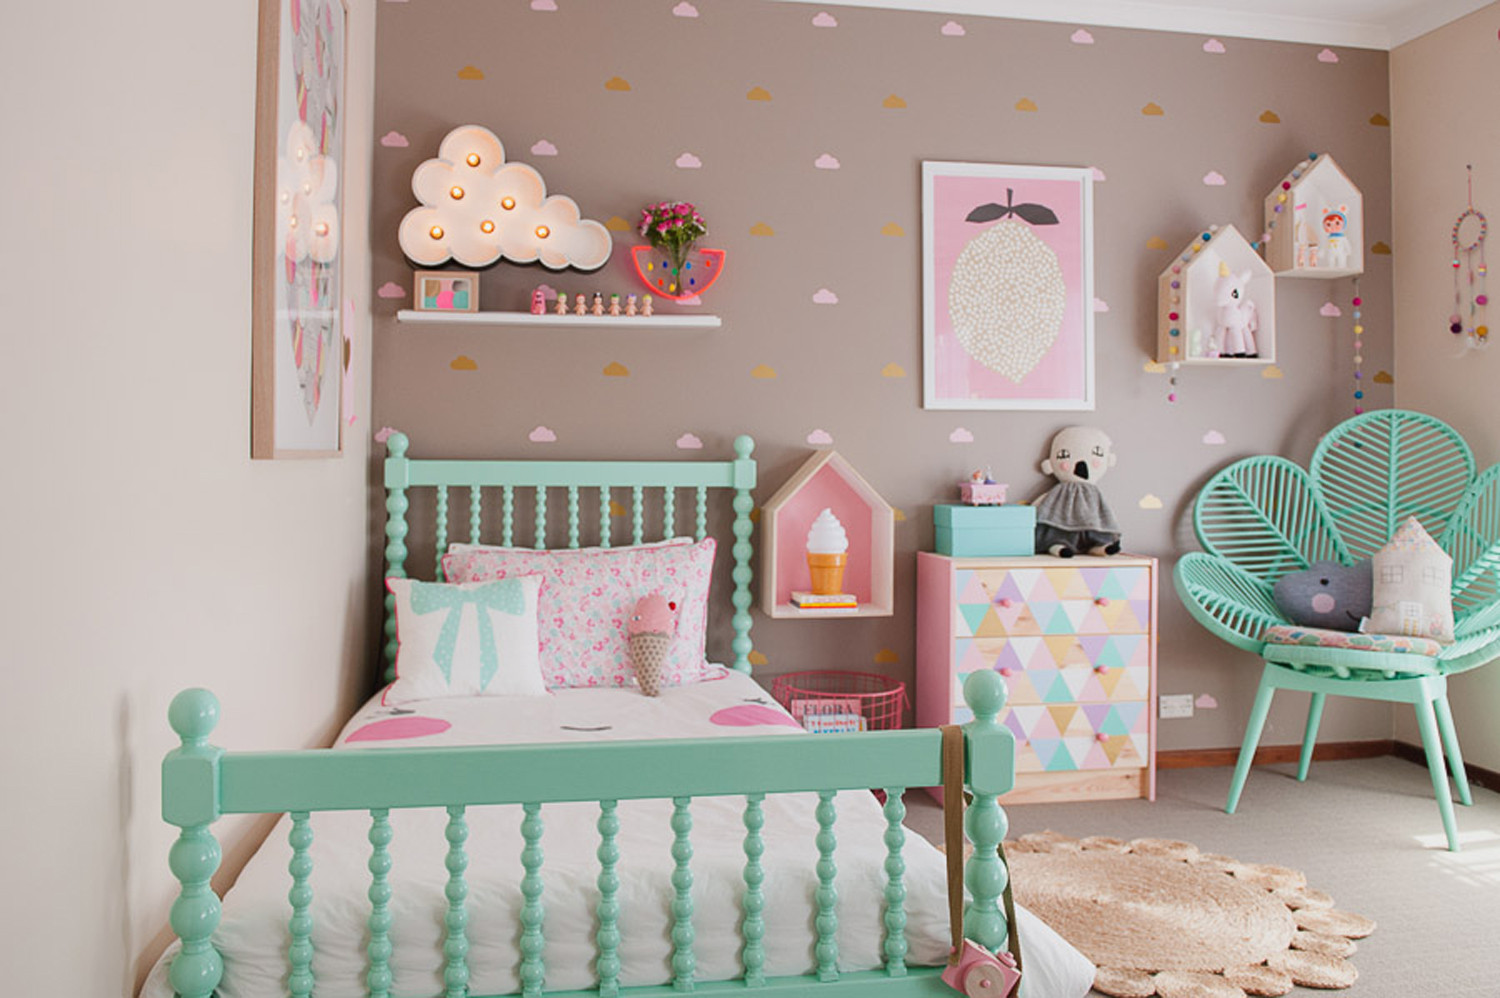 Ideas For Kids Bedrooms
 27 Stylish Ways to Decorate your Children s Bedroom The